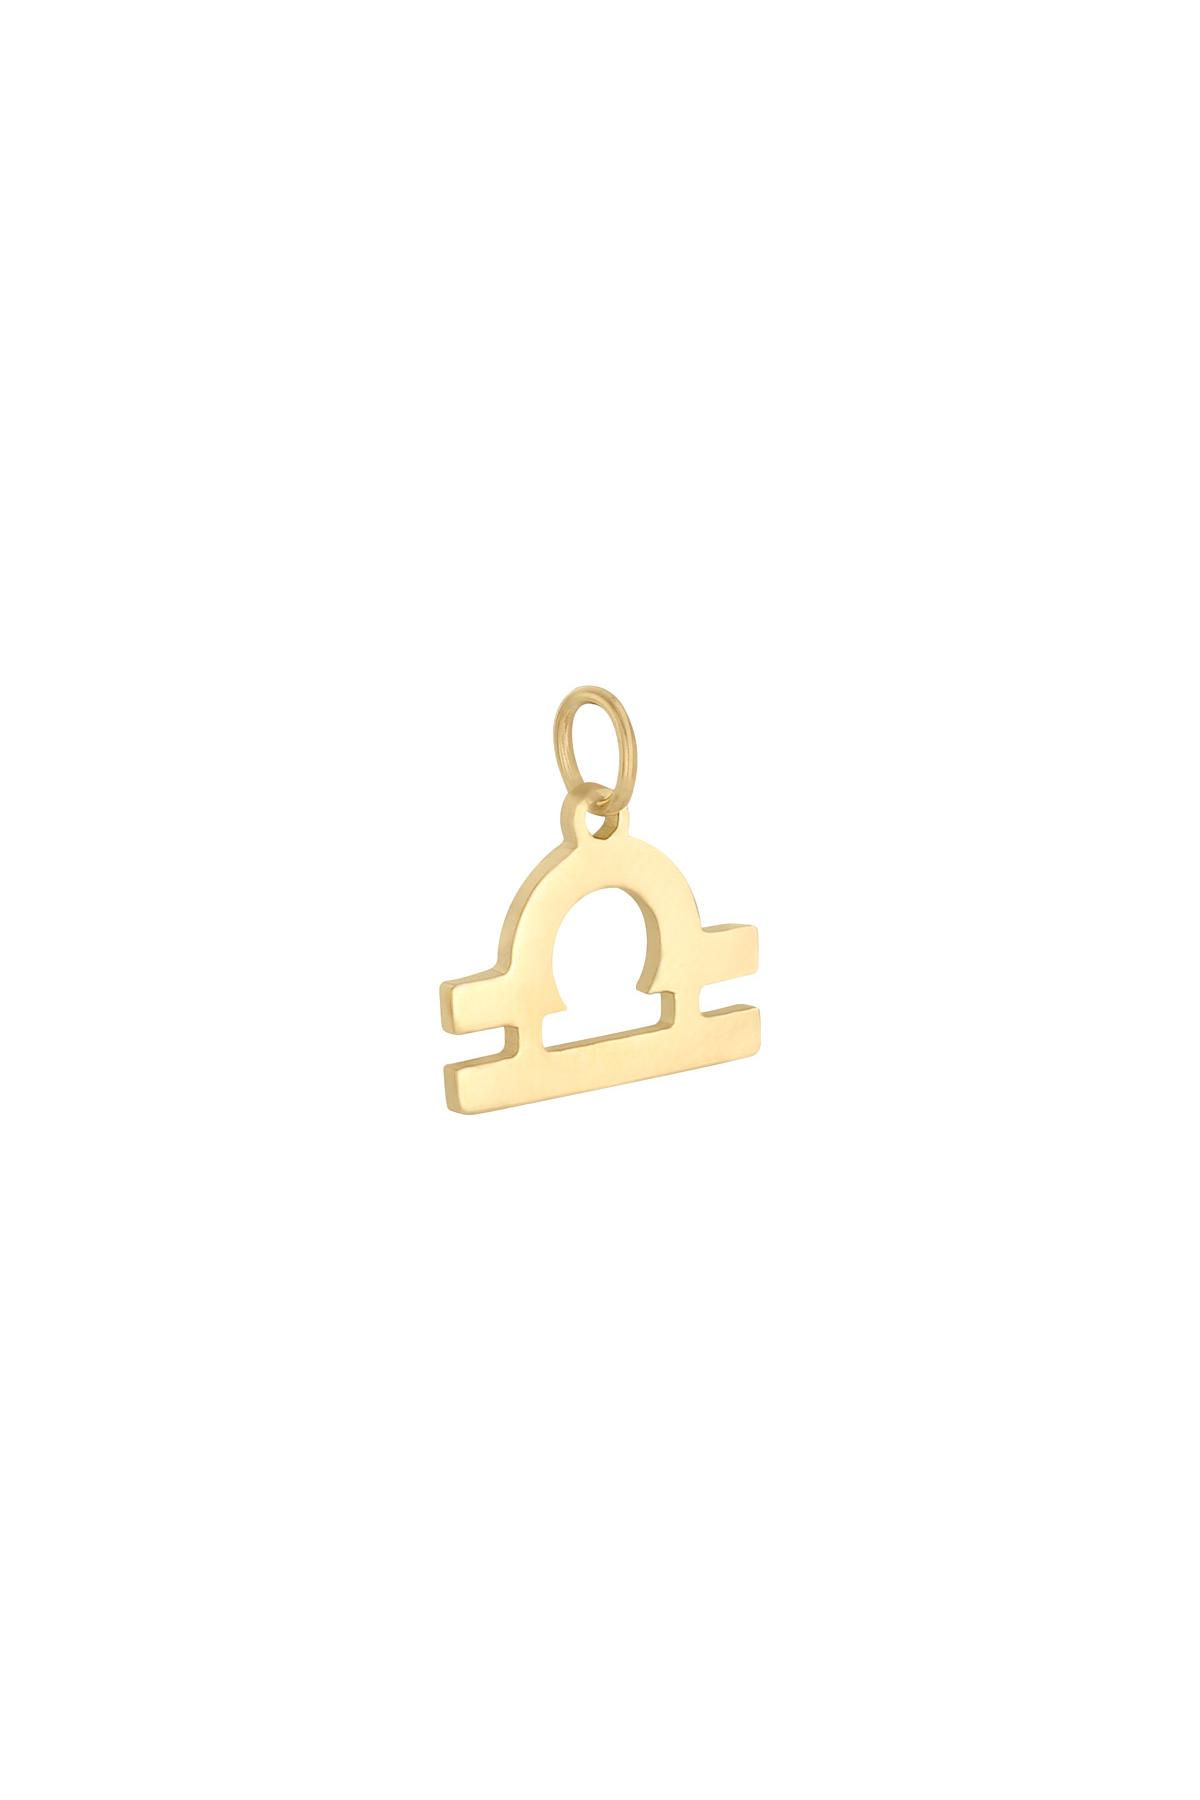 Gold / Charm Zodiac Libra Gold Stainless Steel Picture9